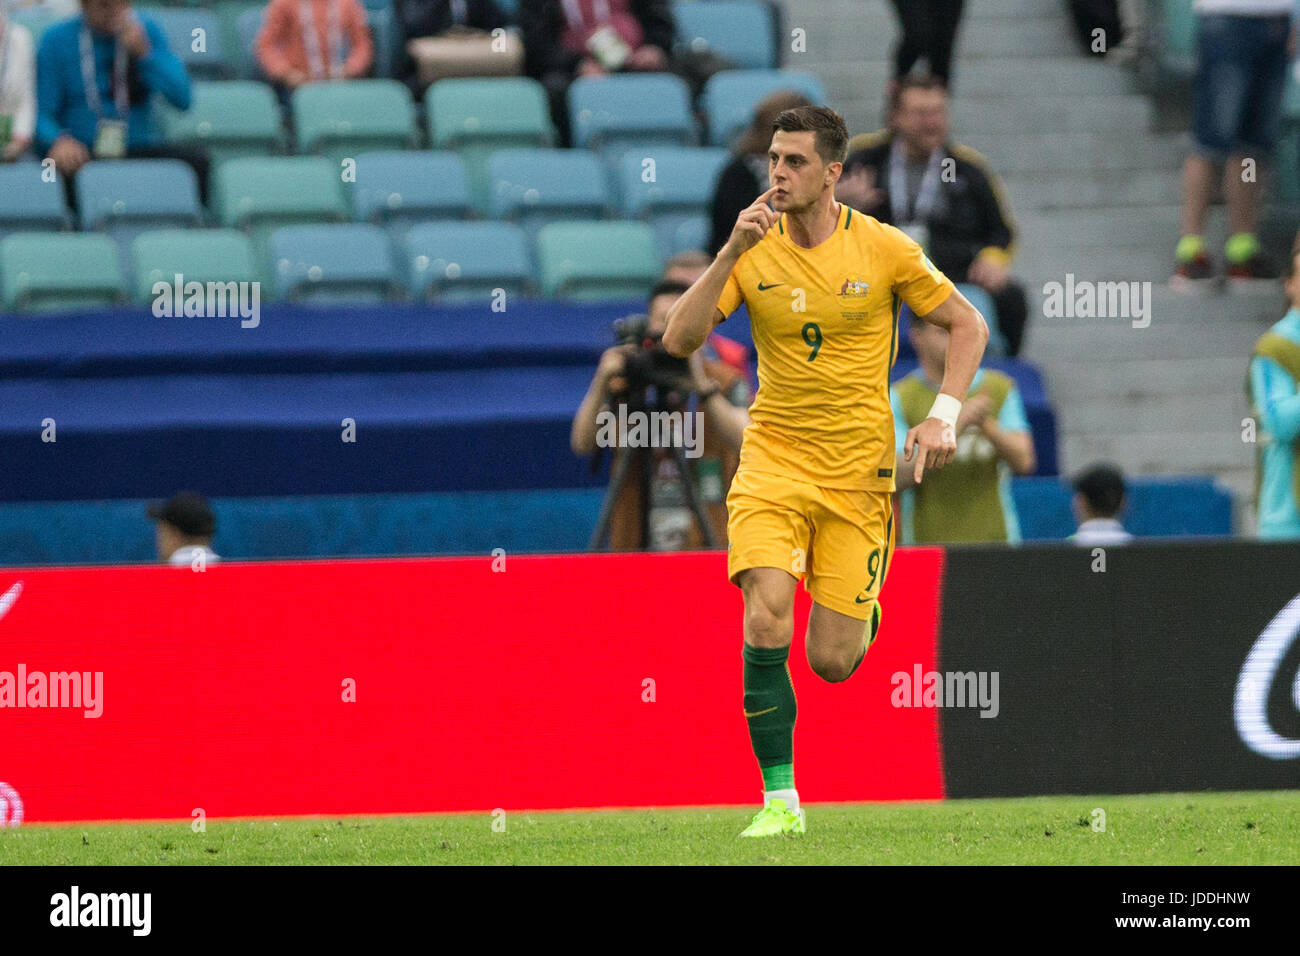 Sochi, Russia. 19th June, 2017. Tomi Juric of Australia celebrates after scoring during the group B match between Australia and Germany of the 2017 FIFA Confederations Cup in Sochi, Russia, on June 19, 2017. Germany won 3-2. Credit: Wu Zhuang/Xinhua/Alamy Live News Stock Photo